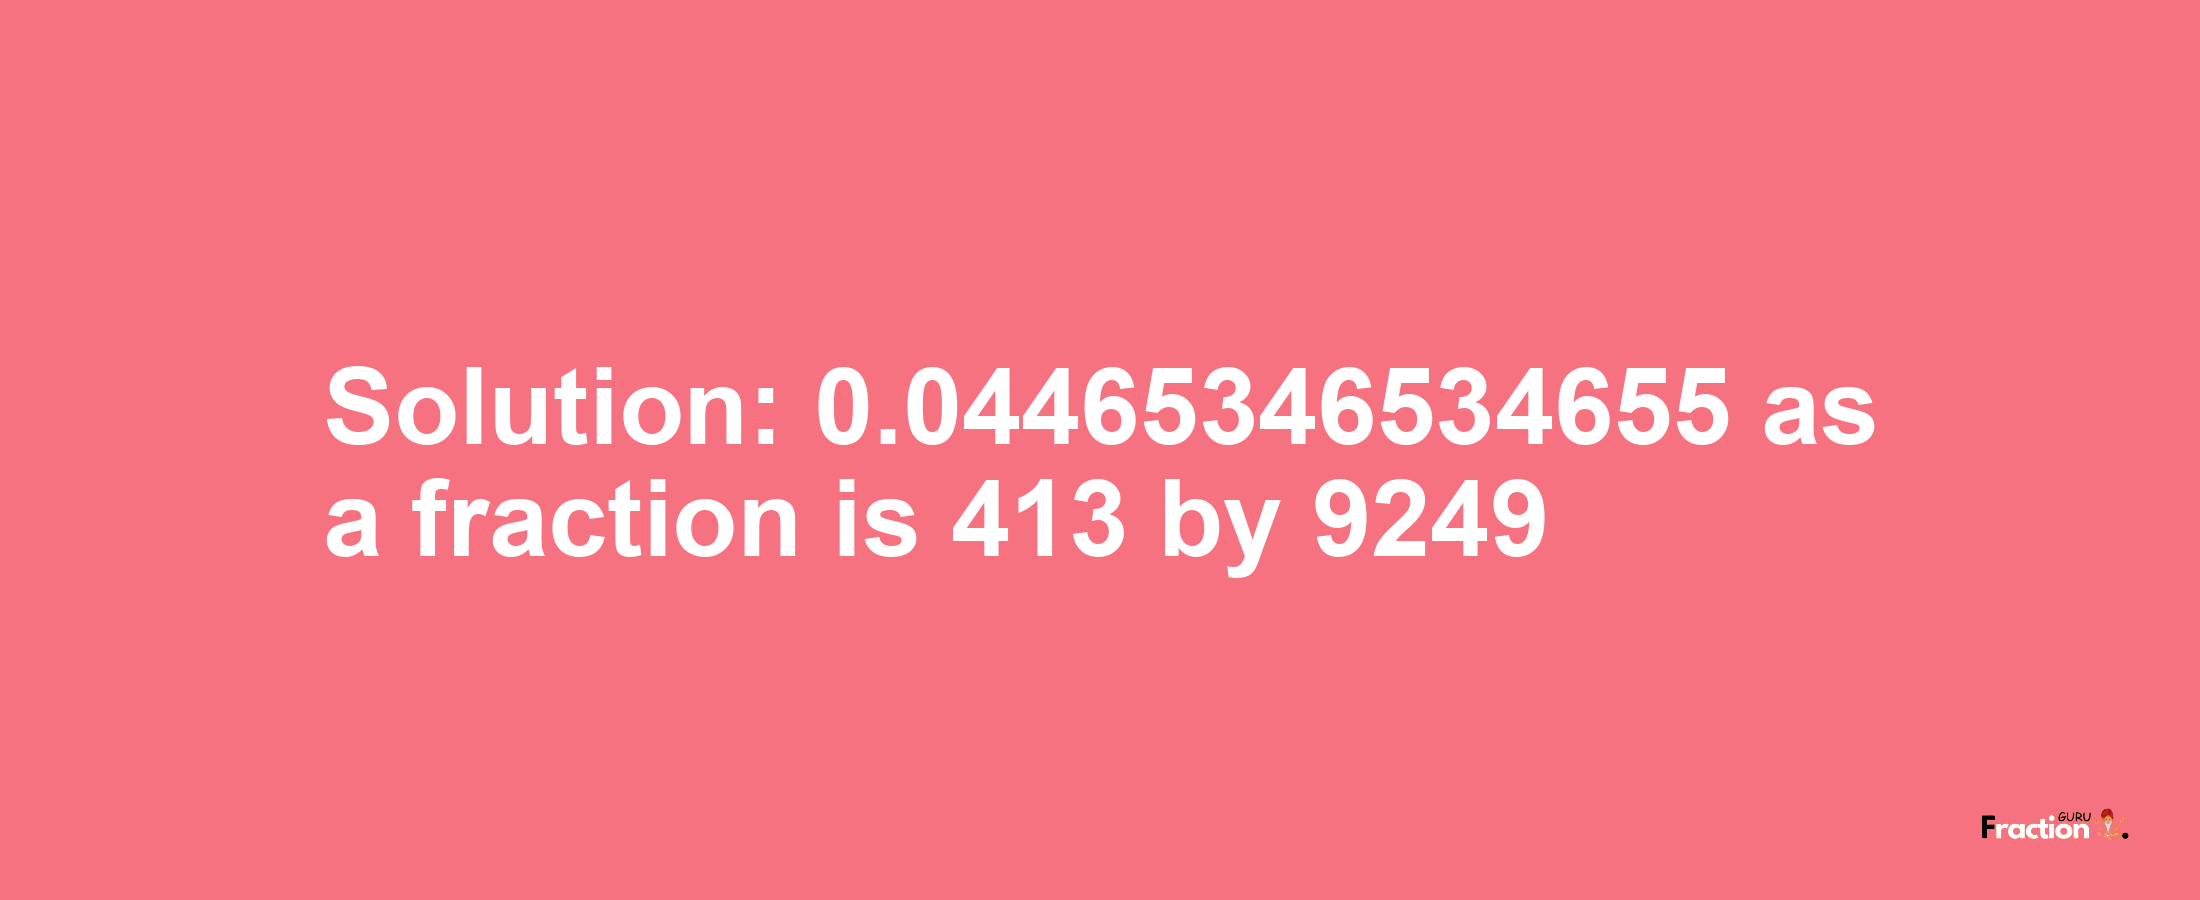 Solution:0.04465346534655 as a fraction is 413/9249